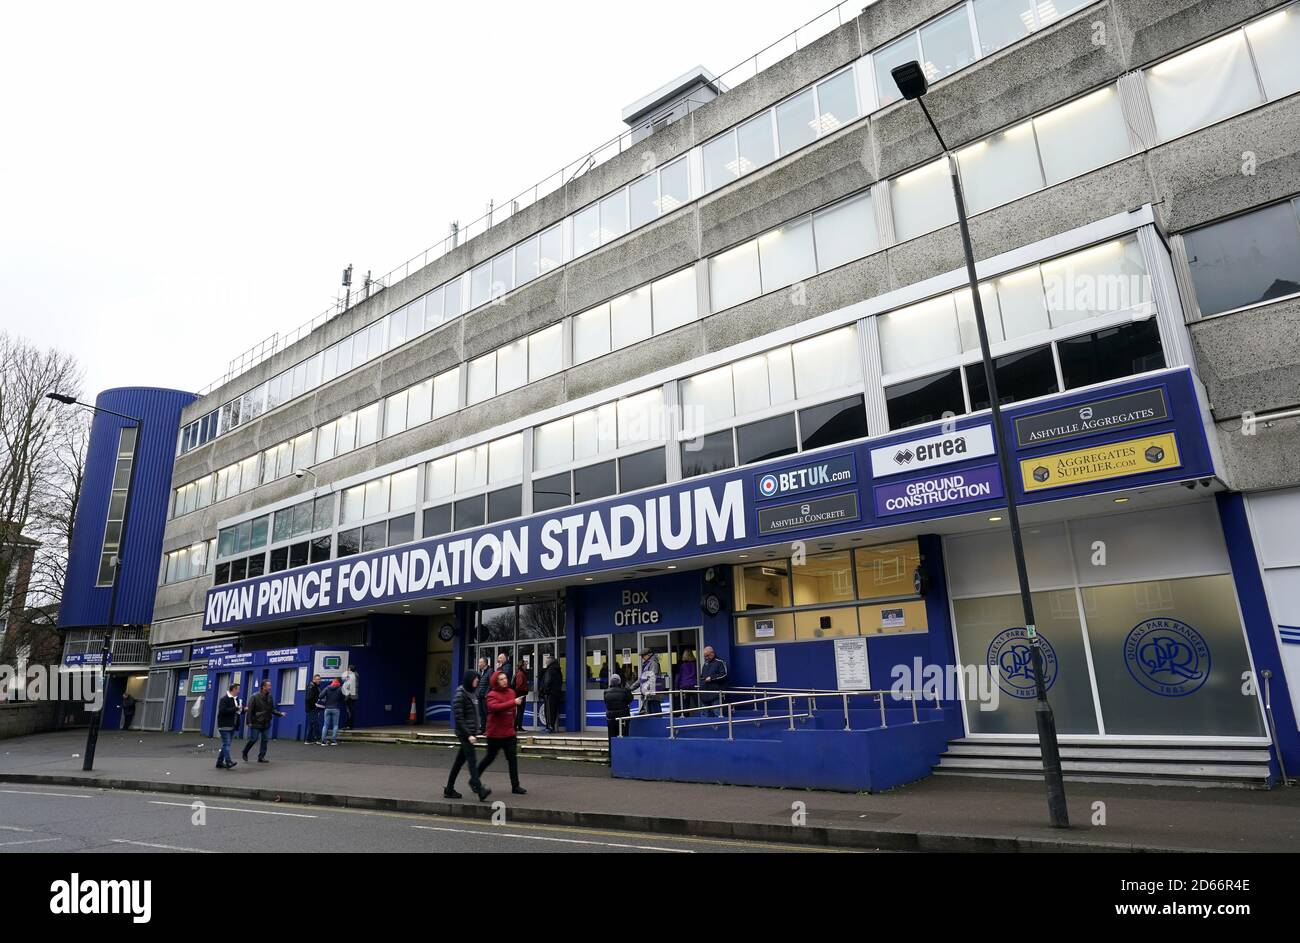 Fans walk past the entrance to the Kiyan Prince foundation stadium, home of Queens Park Rangers Stock Photo